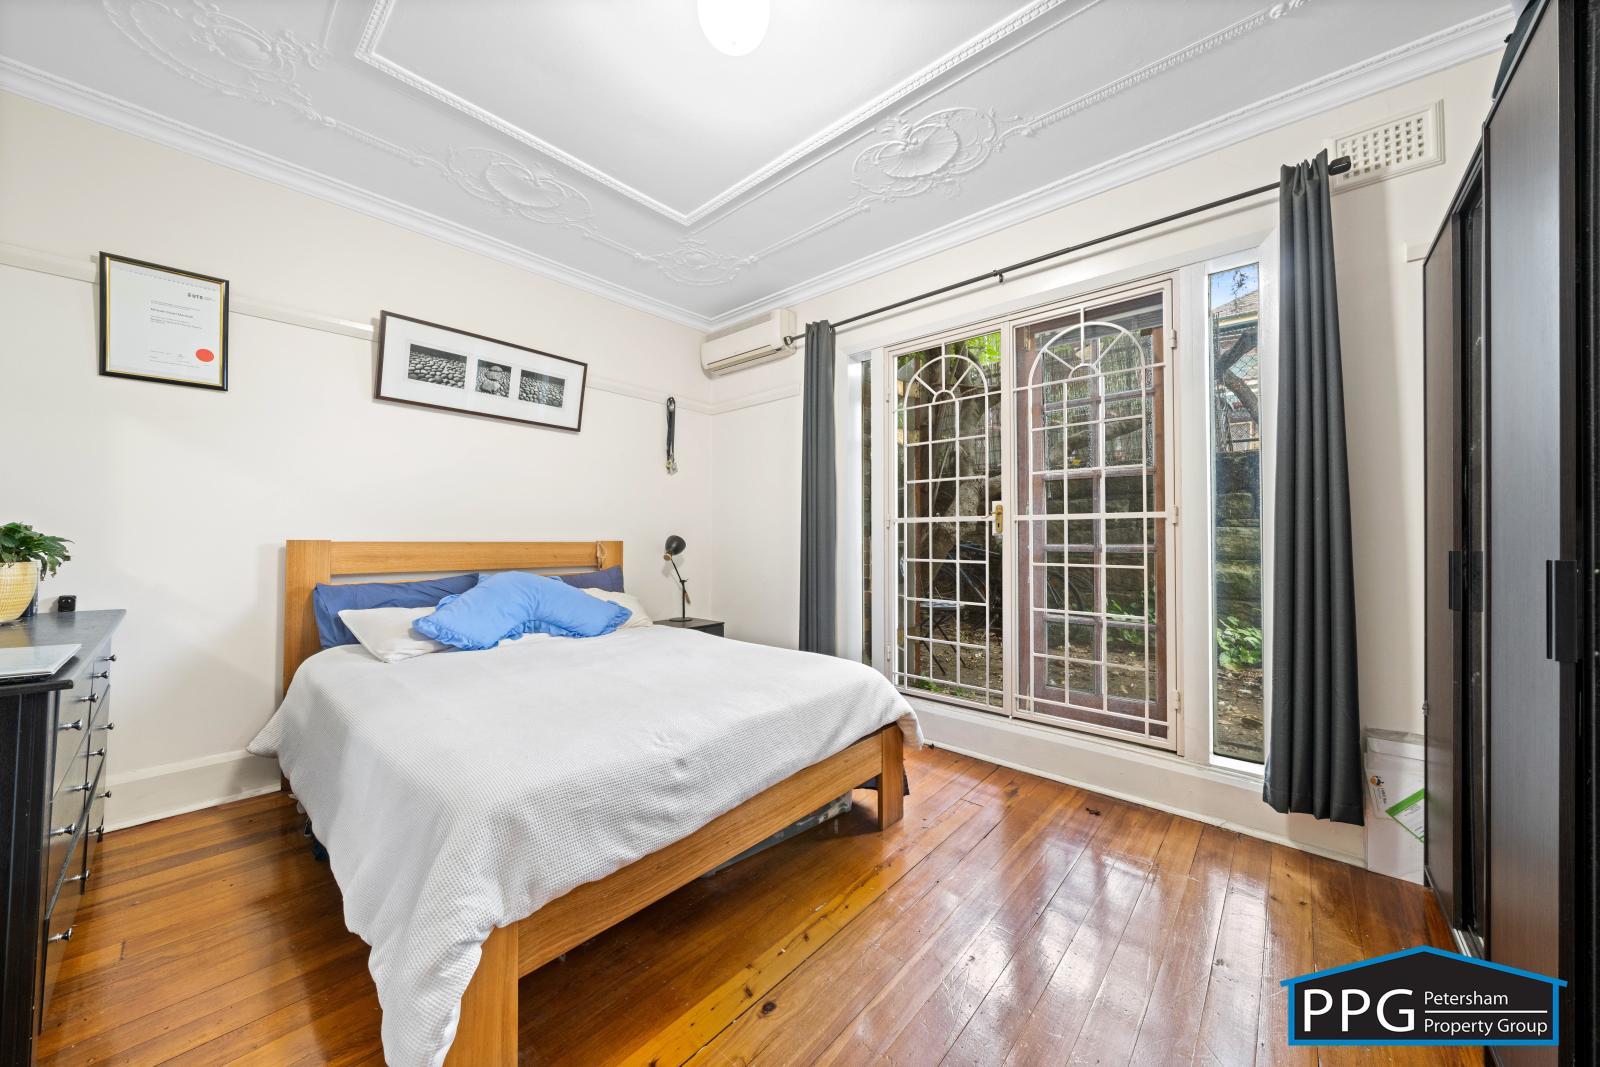 Open for inspection in Petersham